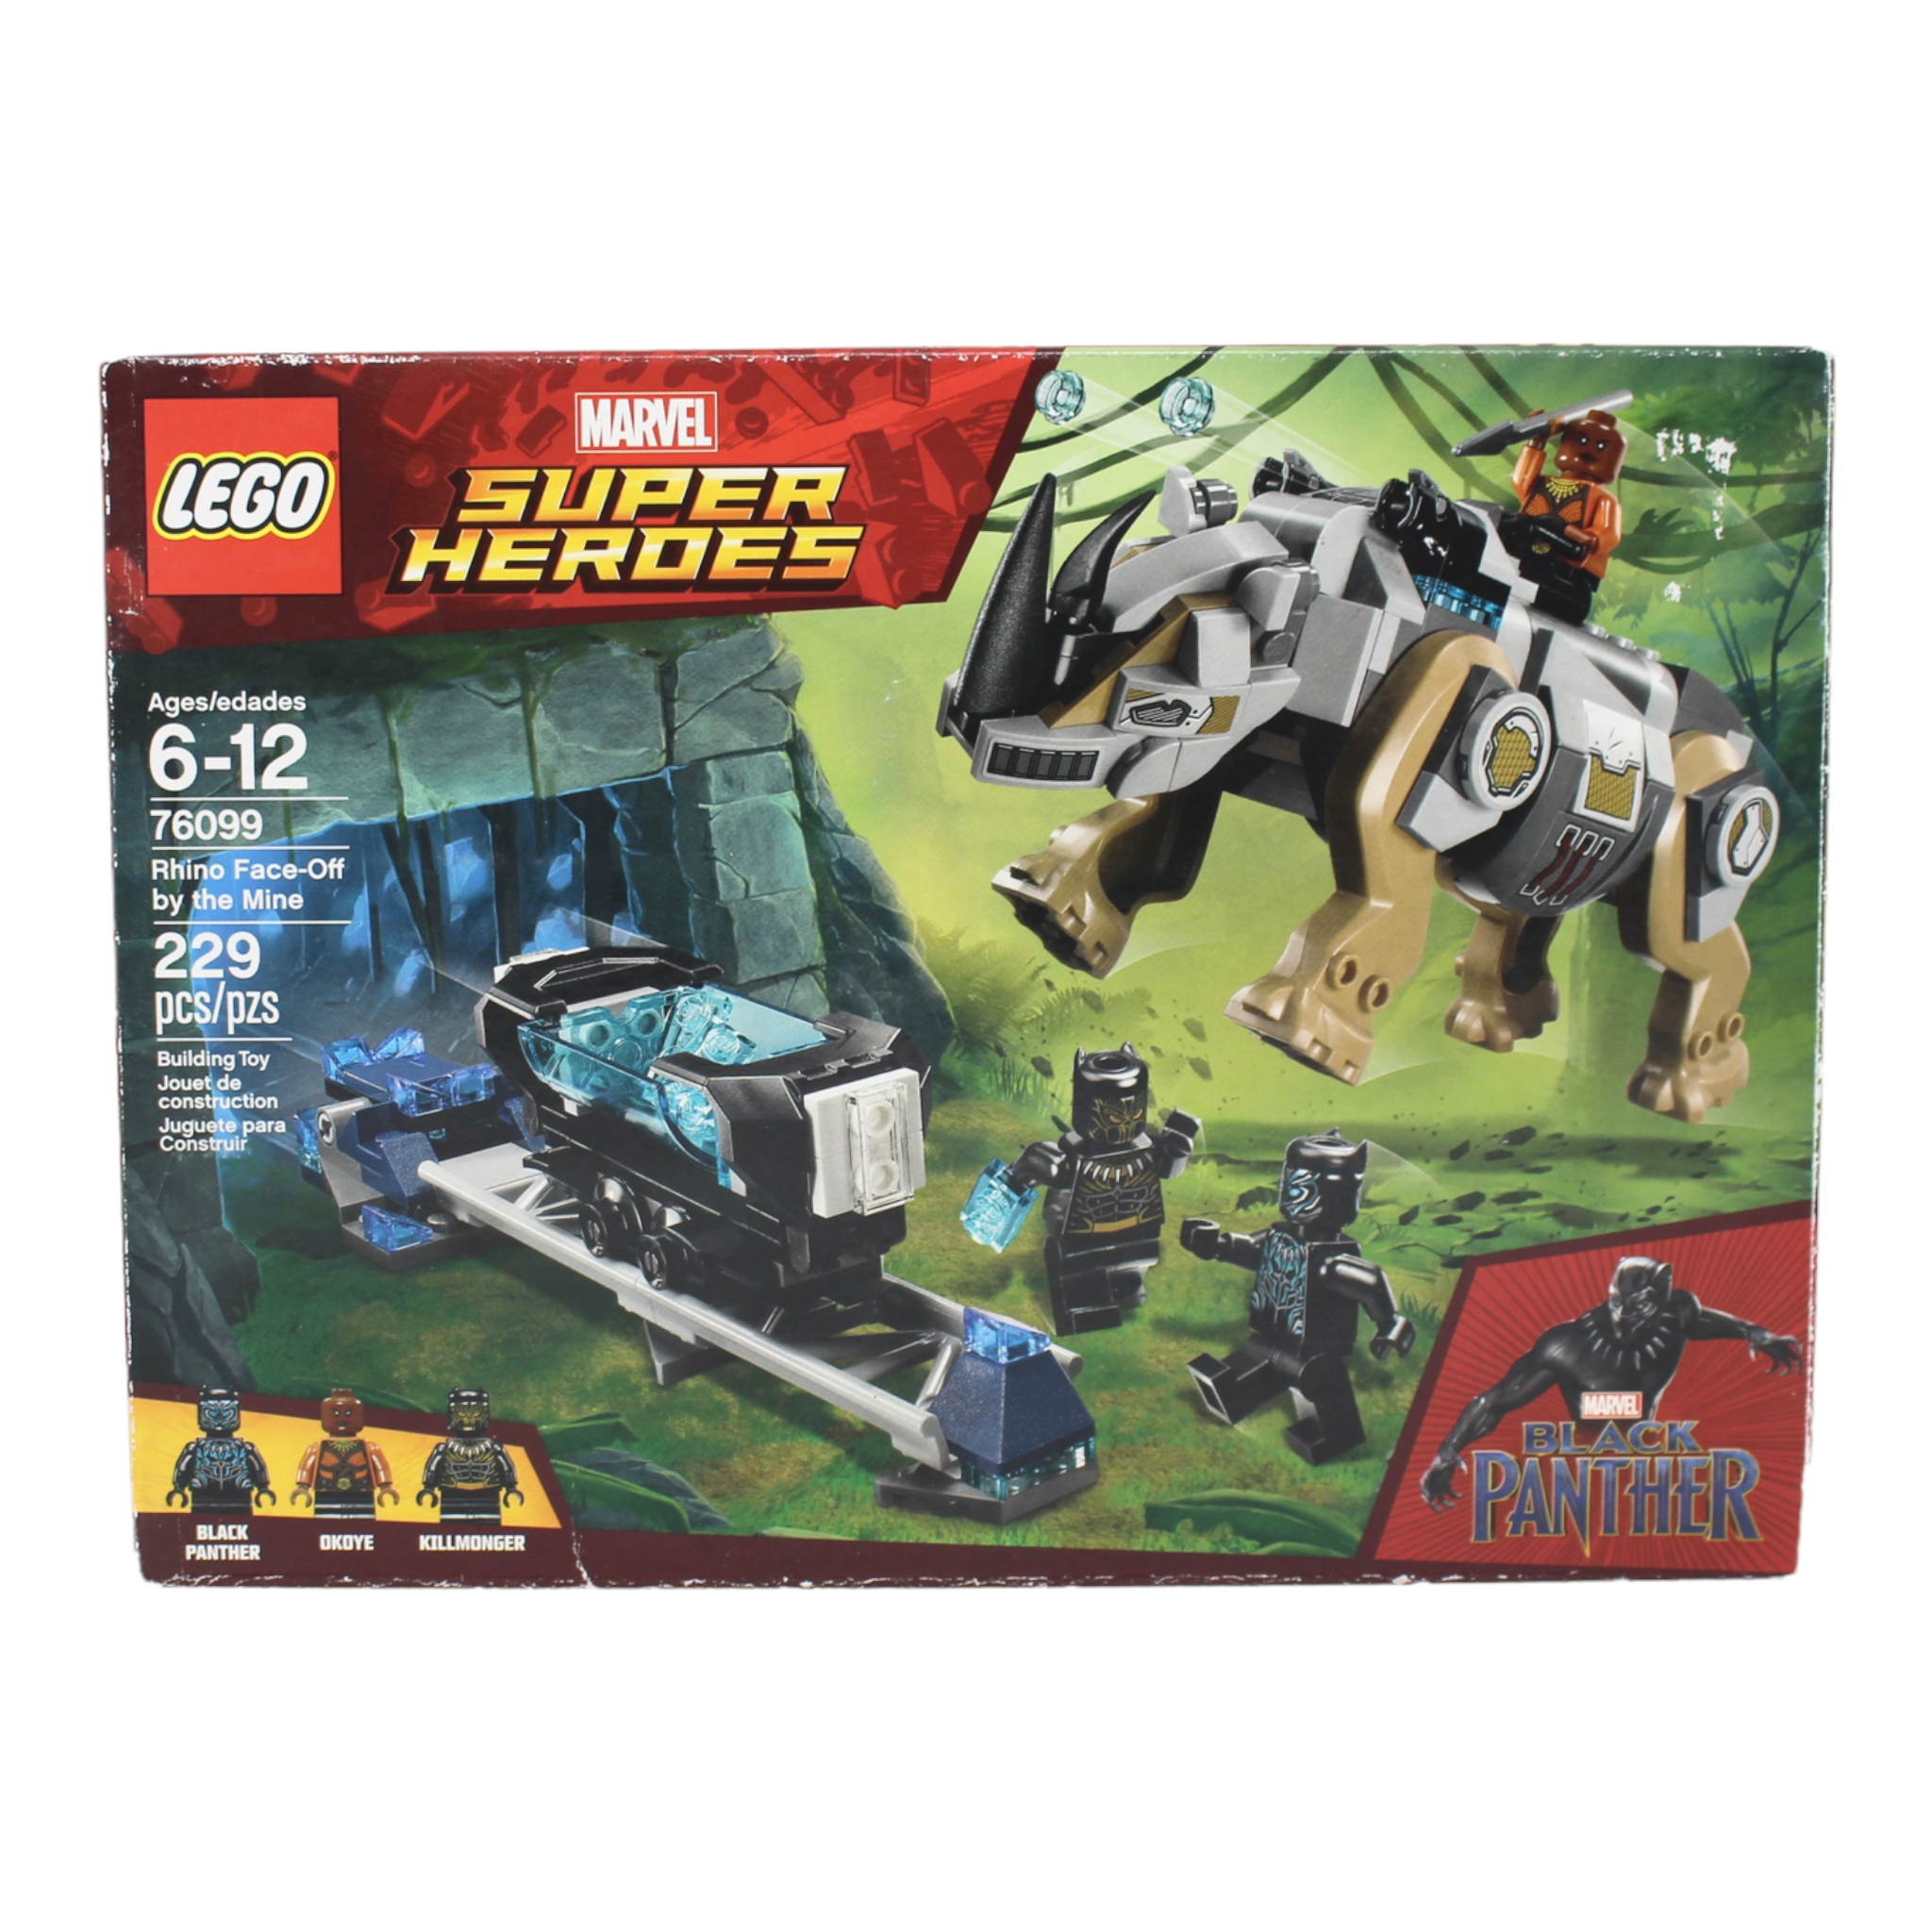 Certified Used Set 76099 Marvel Super Heroes Rhino Face-Off by the Mine